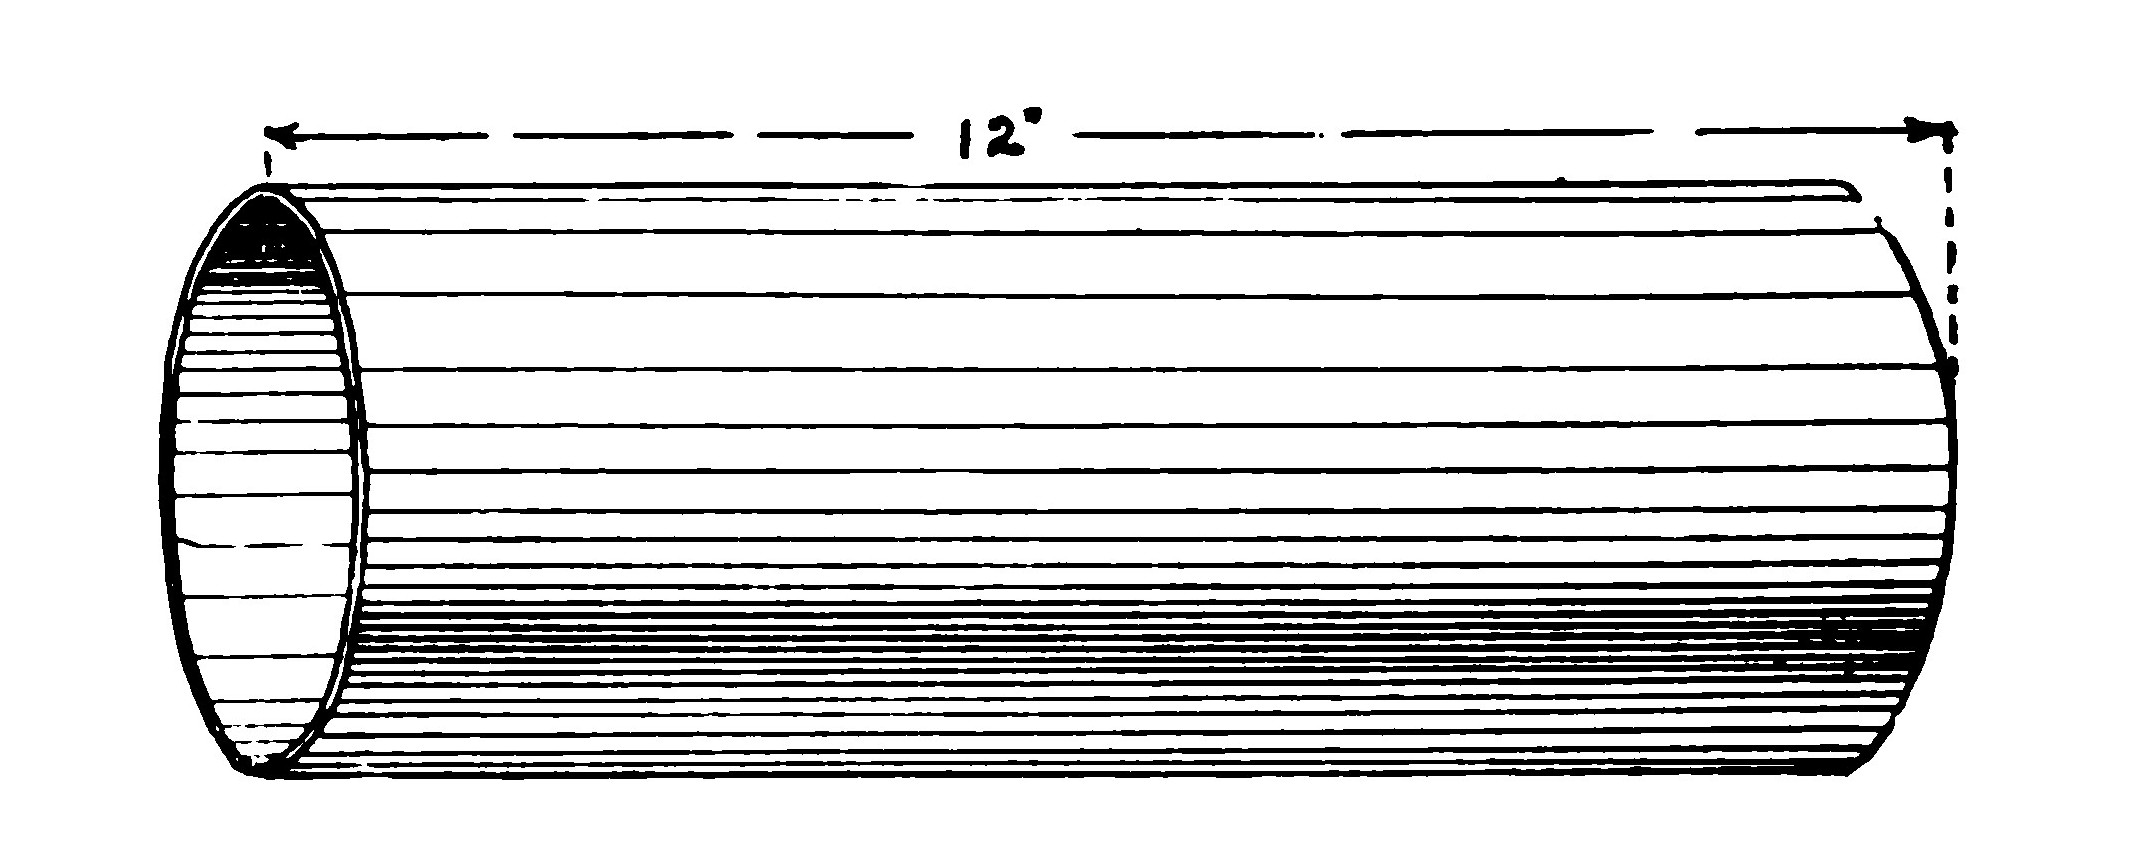 FIG. 171.—Secondary Tube.